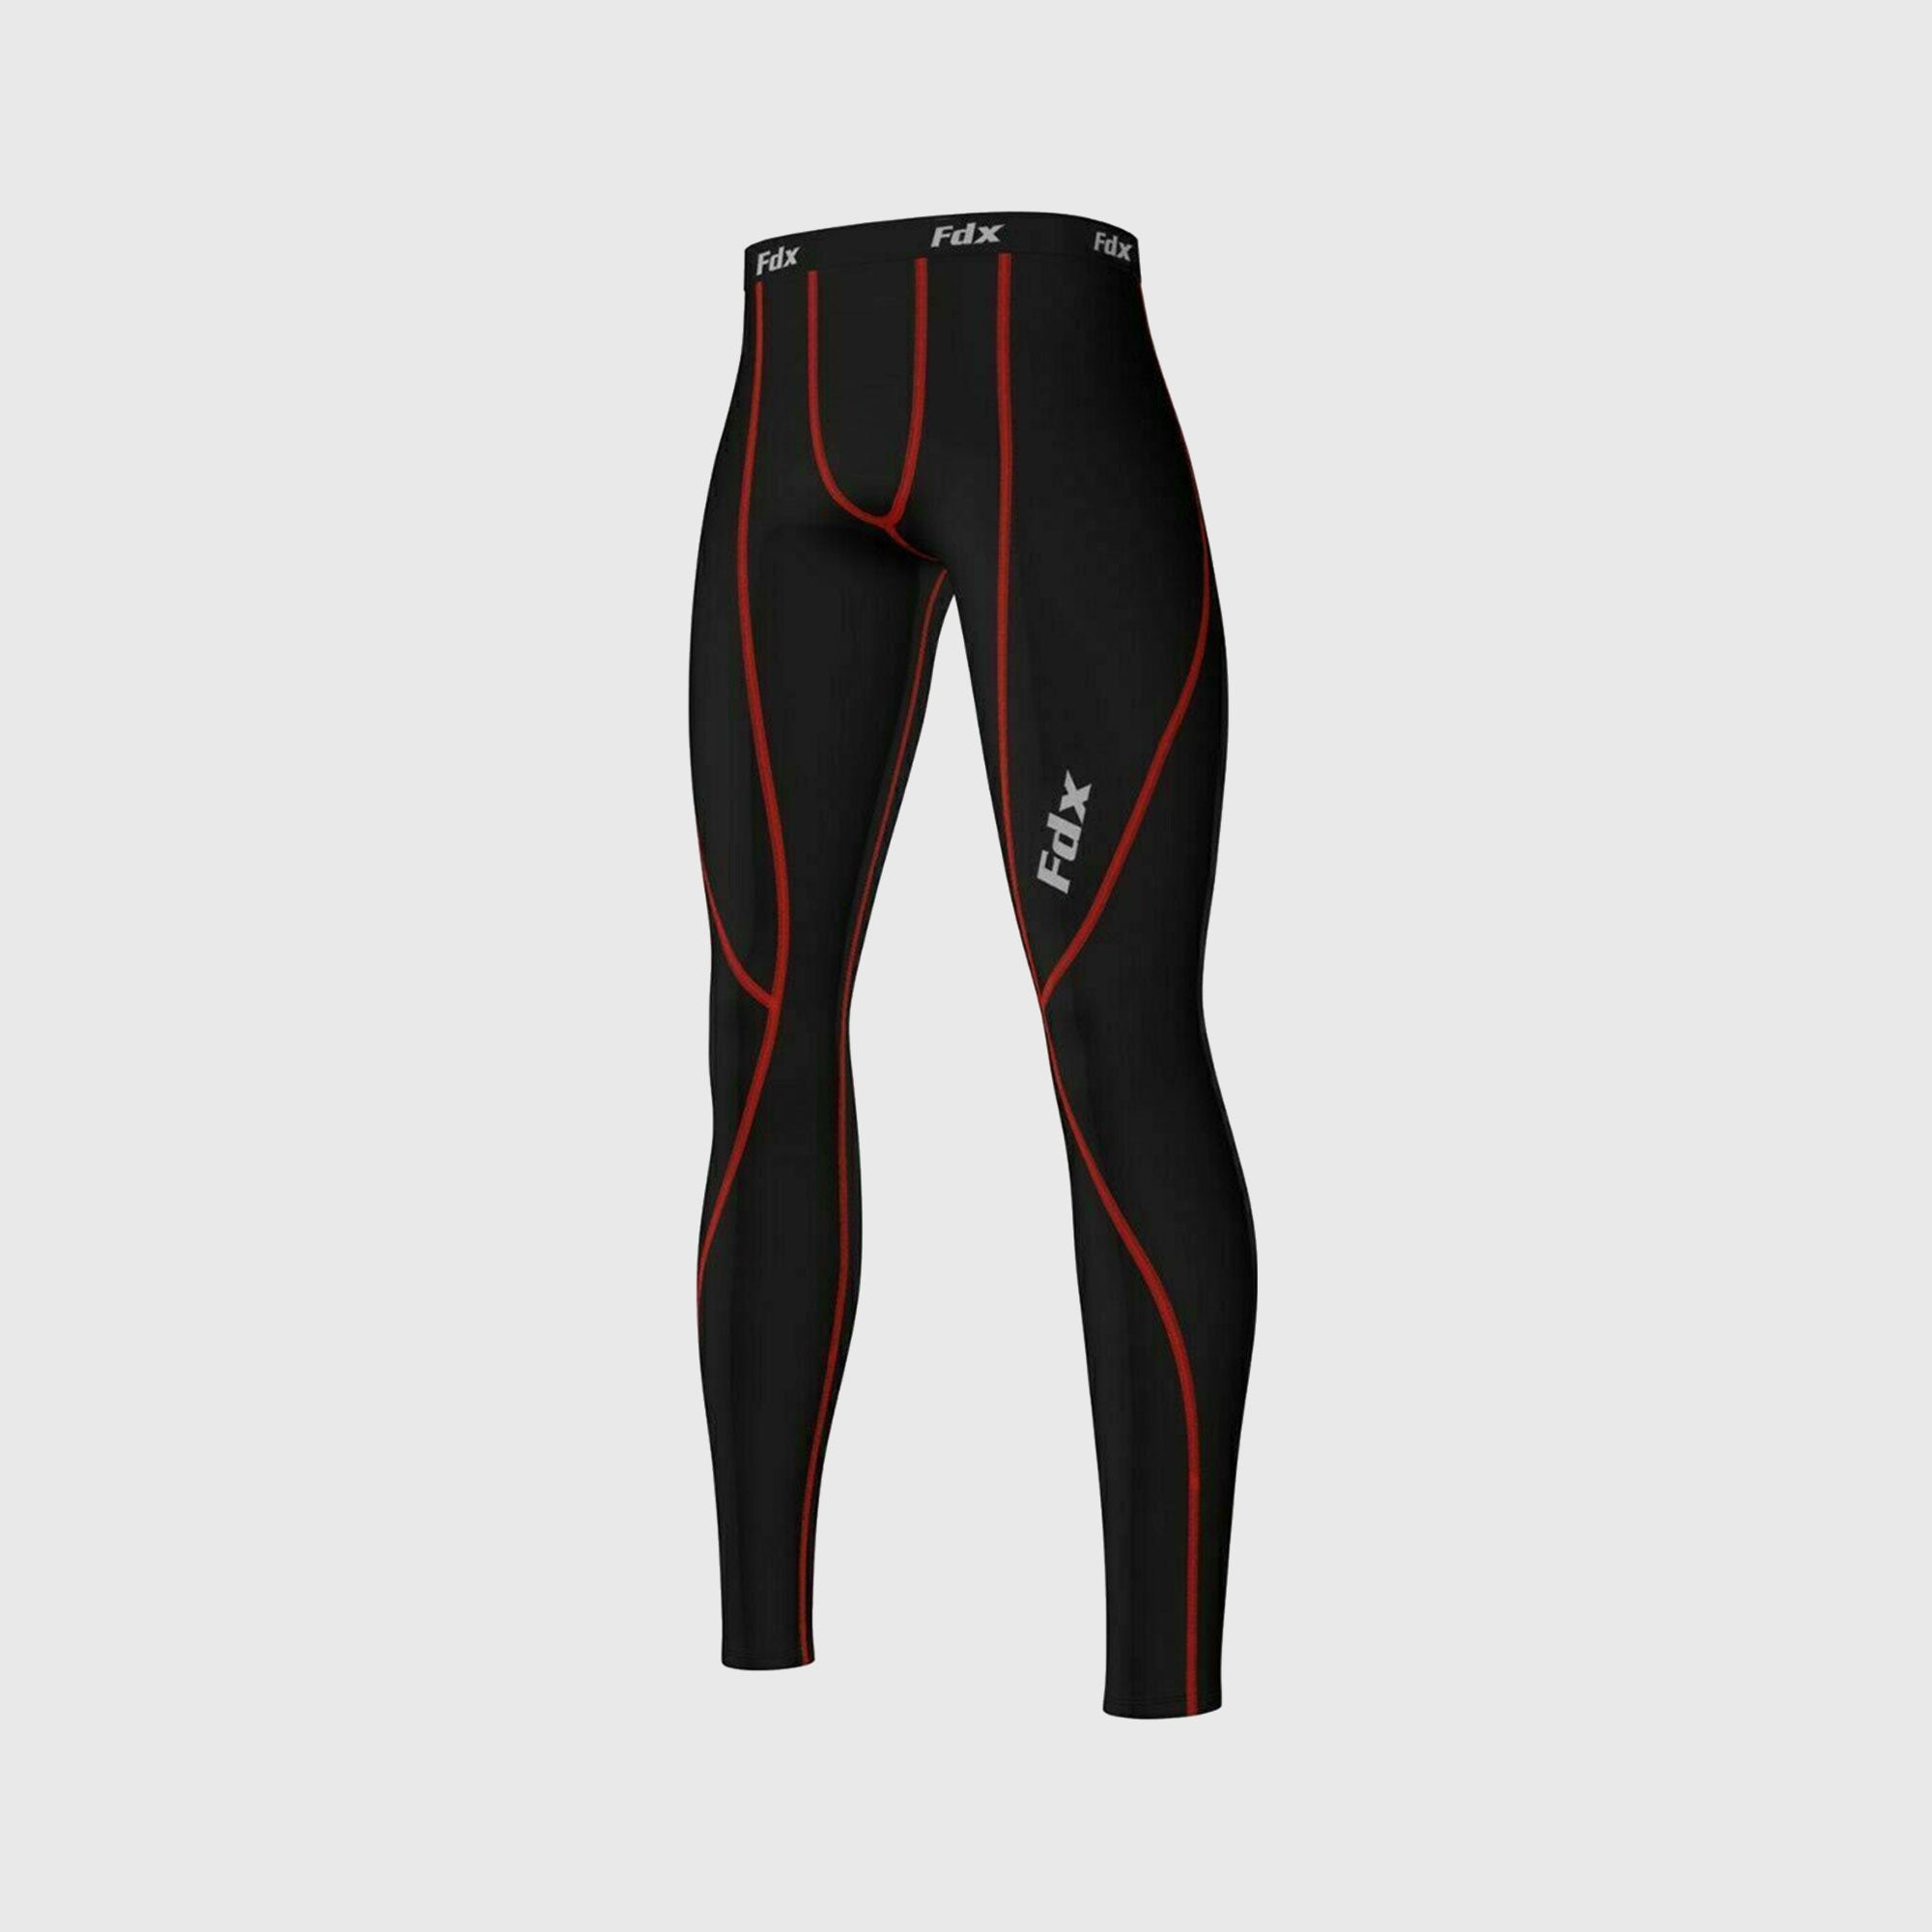 Fdx Black & Red Compression Tights Leggings Gym Workout Running Athletic Yoga Elastic Waistband Stretchable Breathable Training Jogging Pants - Thermolinx